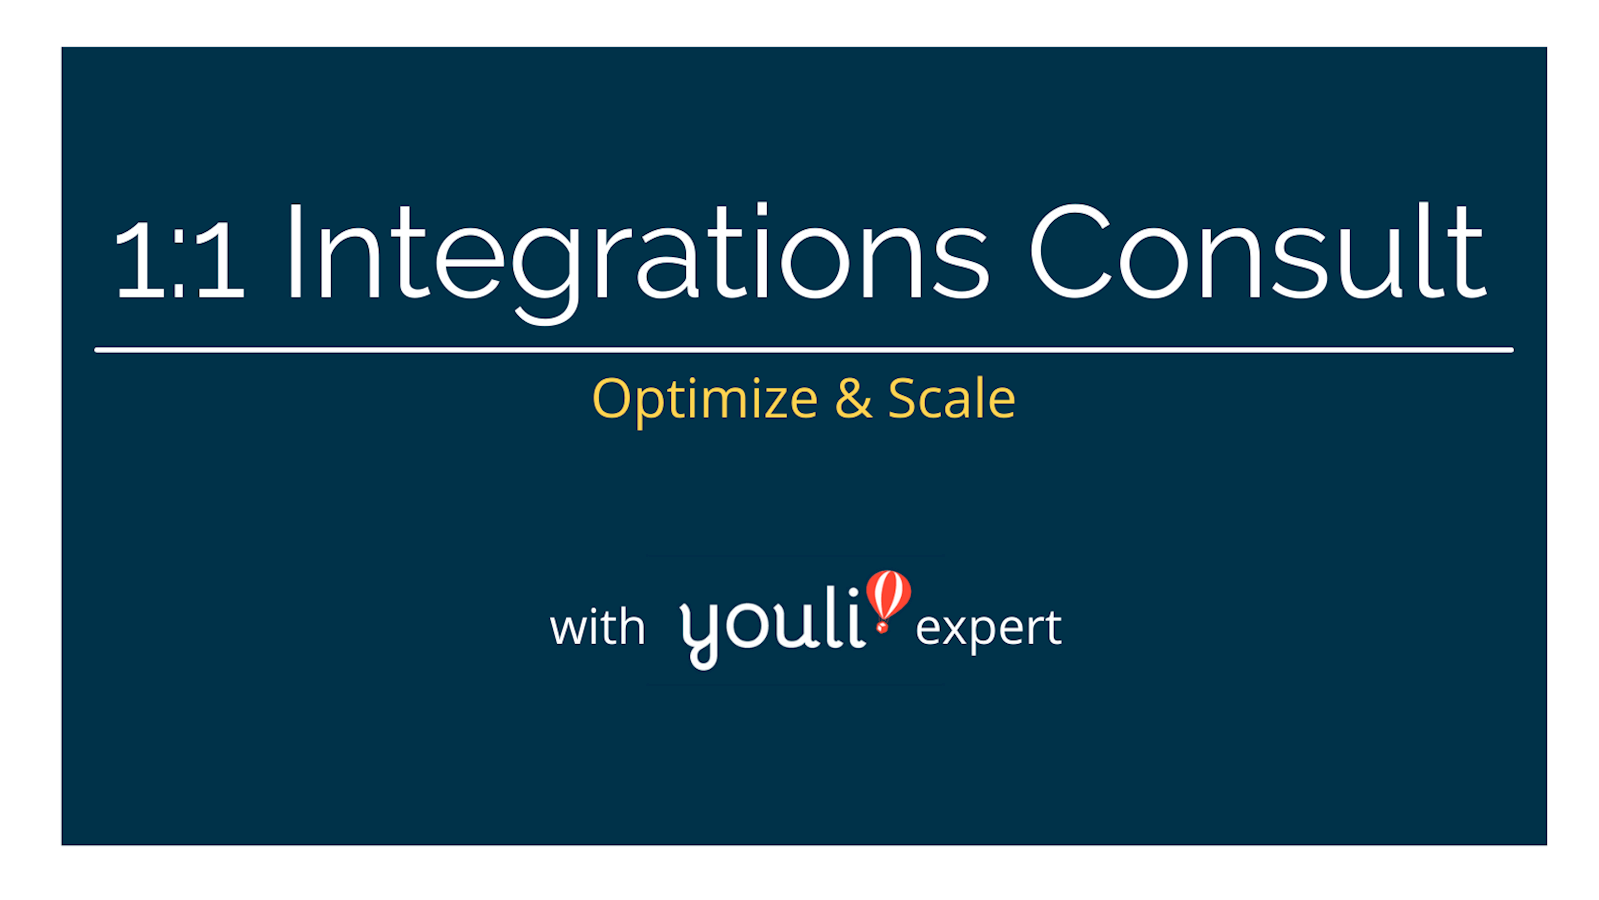 1:1 Integrations consult with YouLi expert